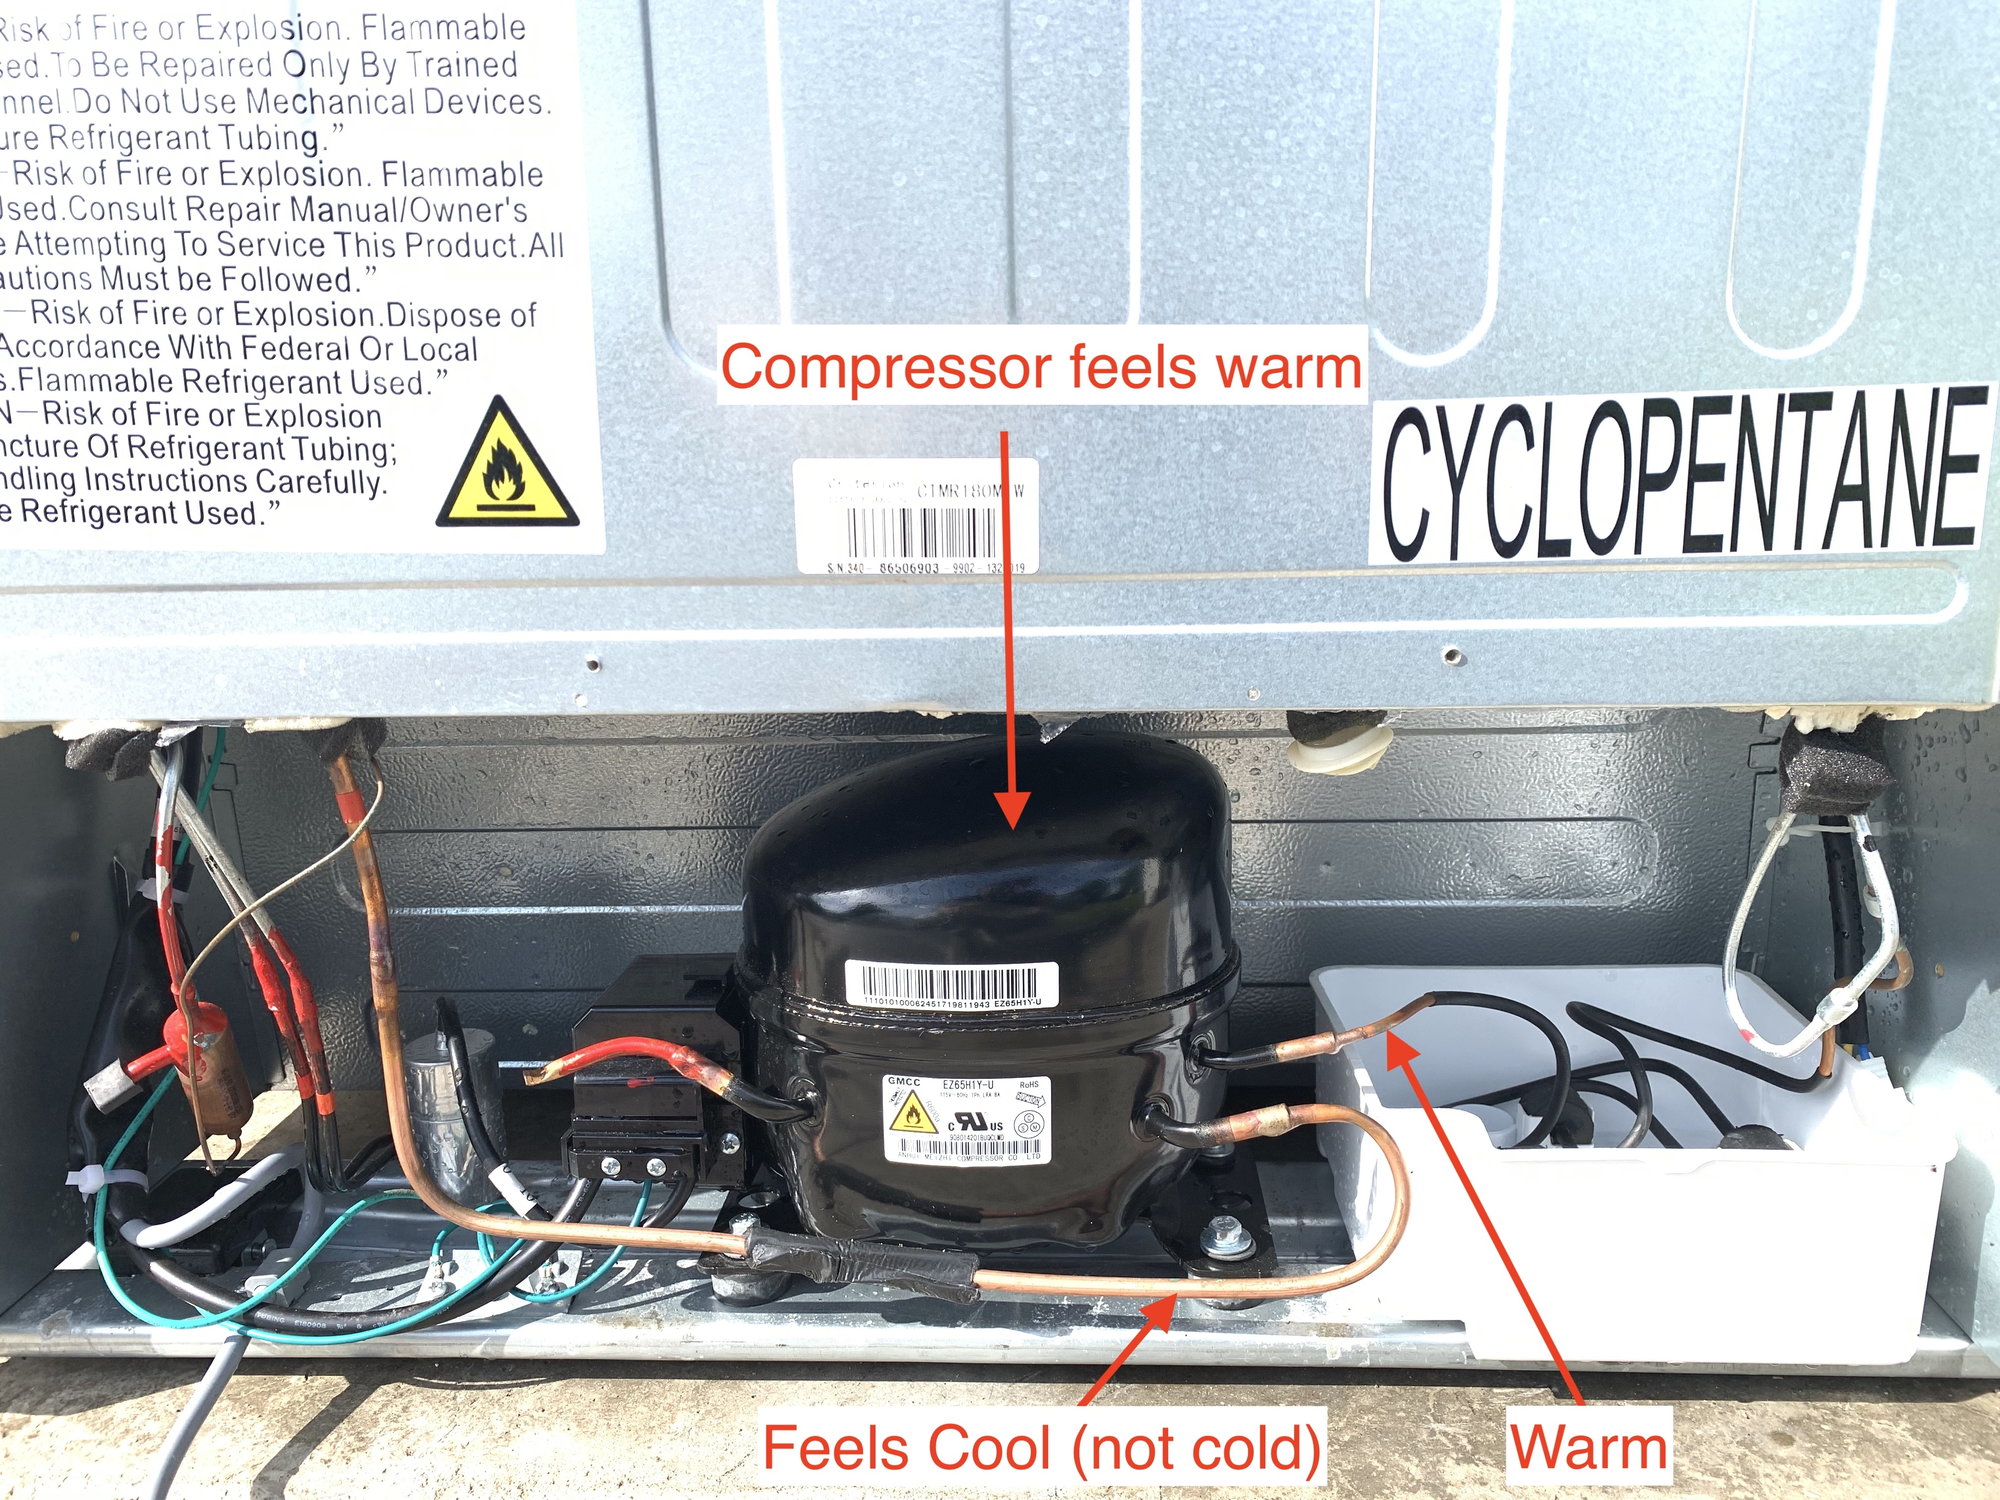 Do You Need Refrigerator Thermostat Repair